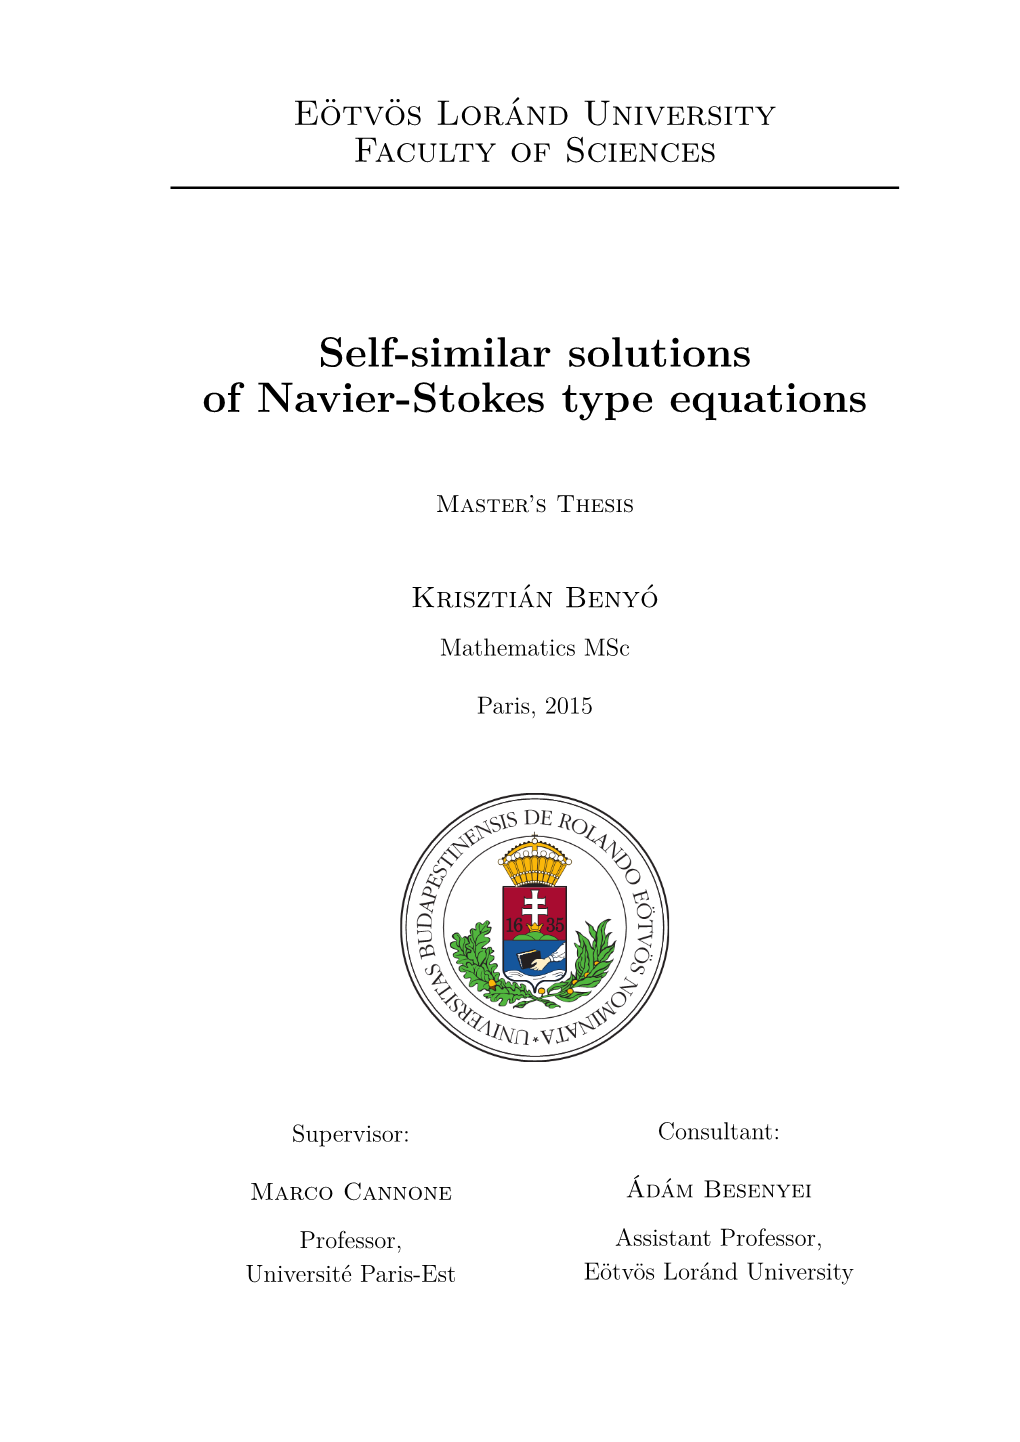 Self-Similar Solutions of Navier-Stokes Type Equations